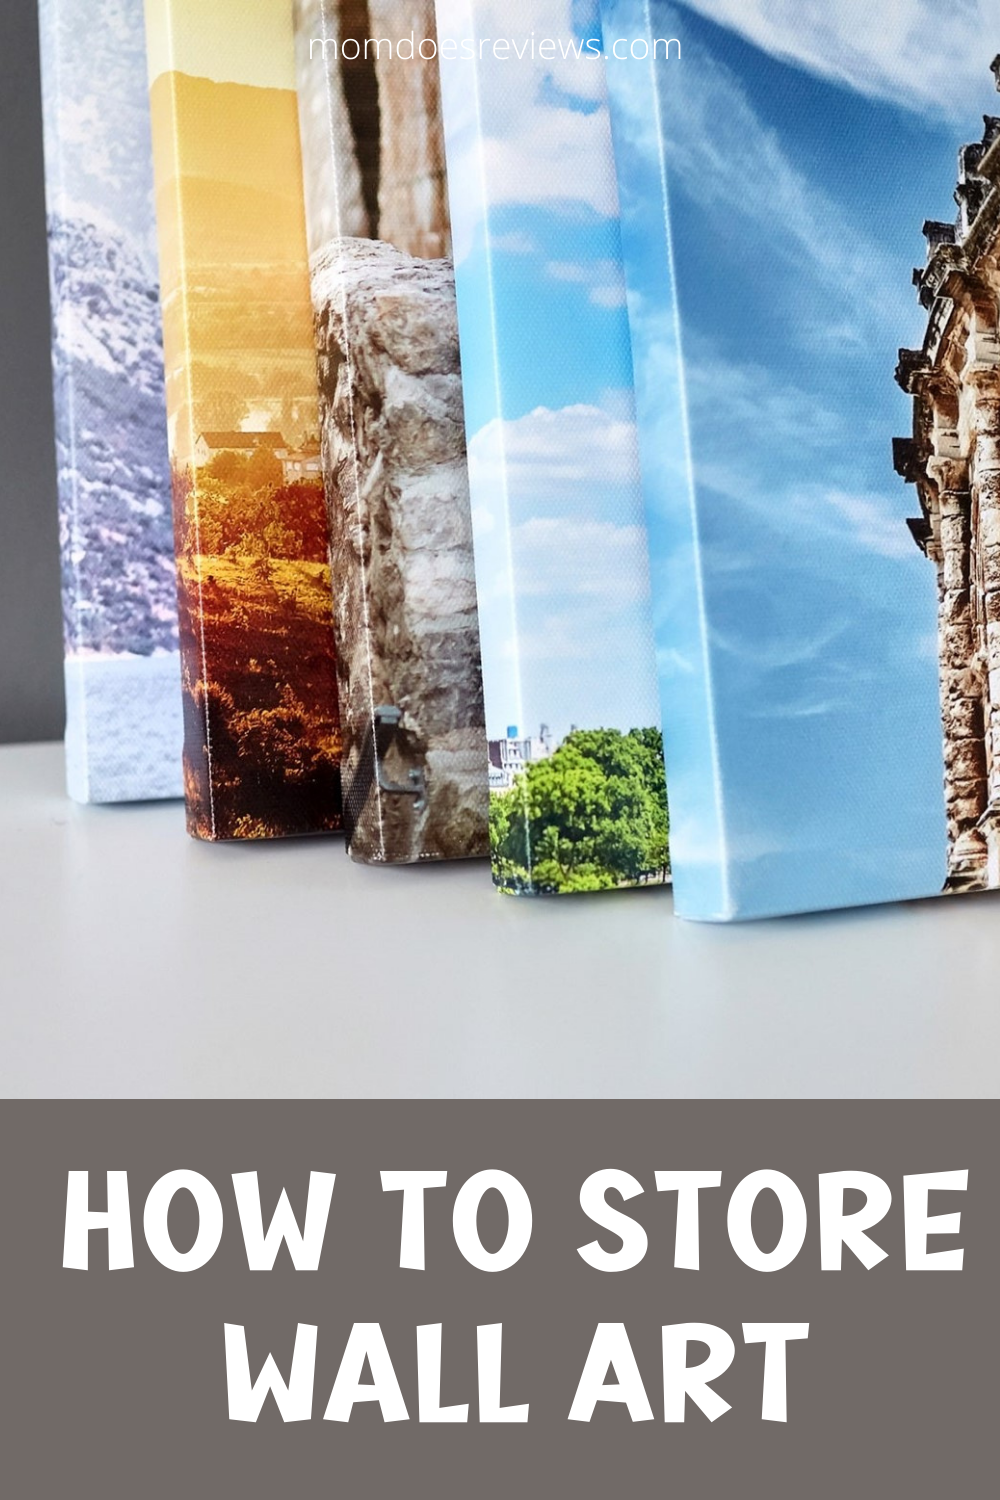 How to Store Wall Art